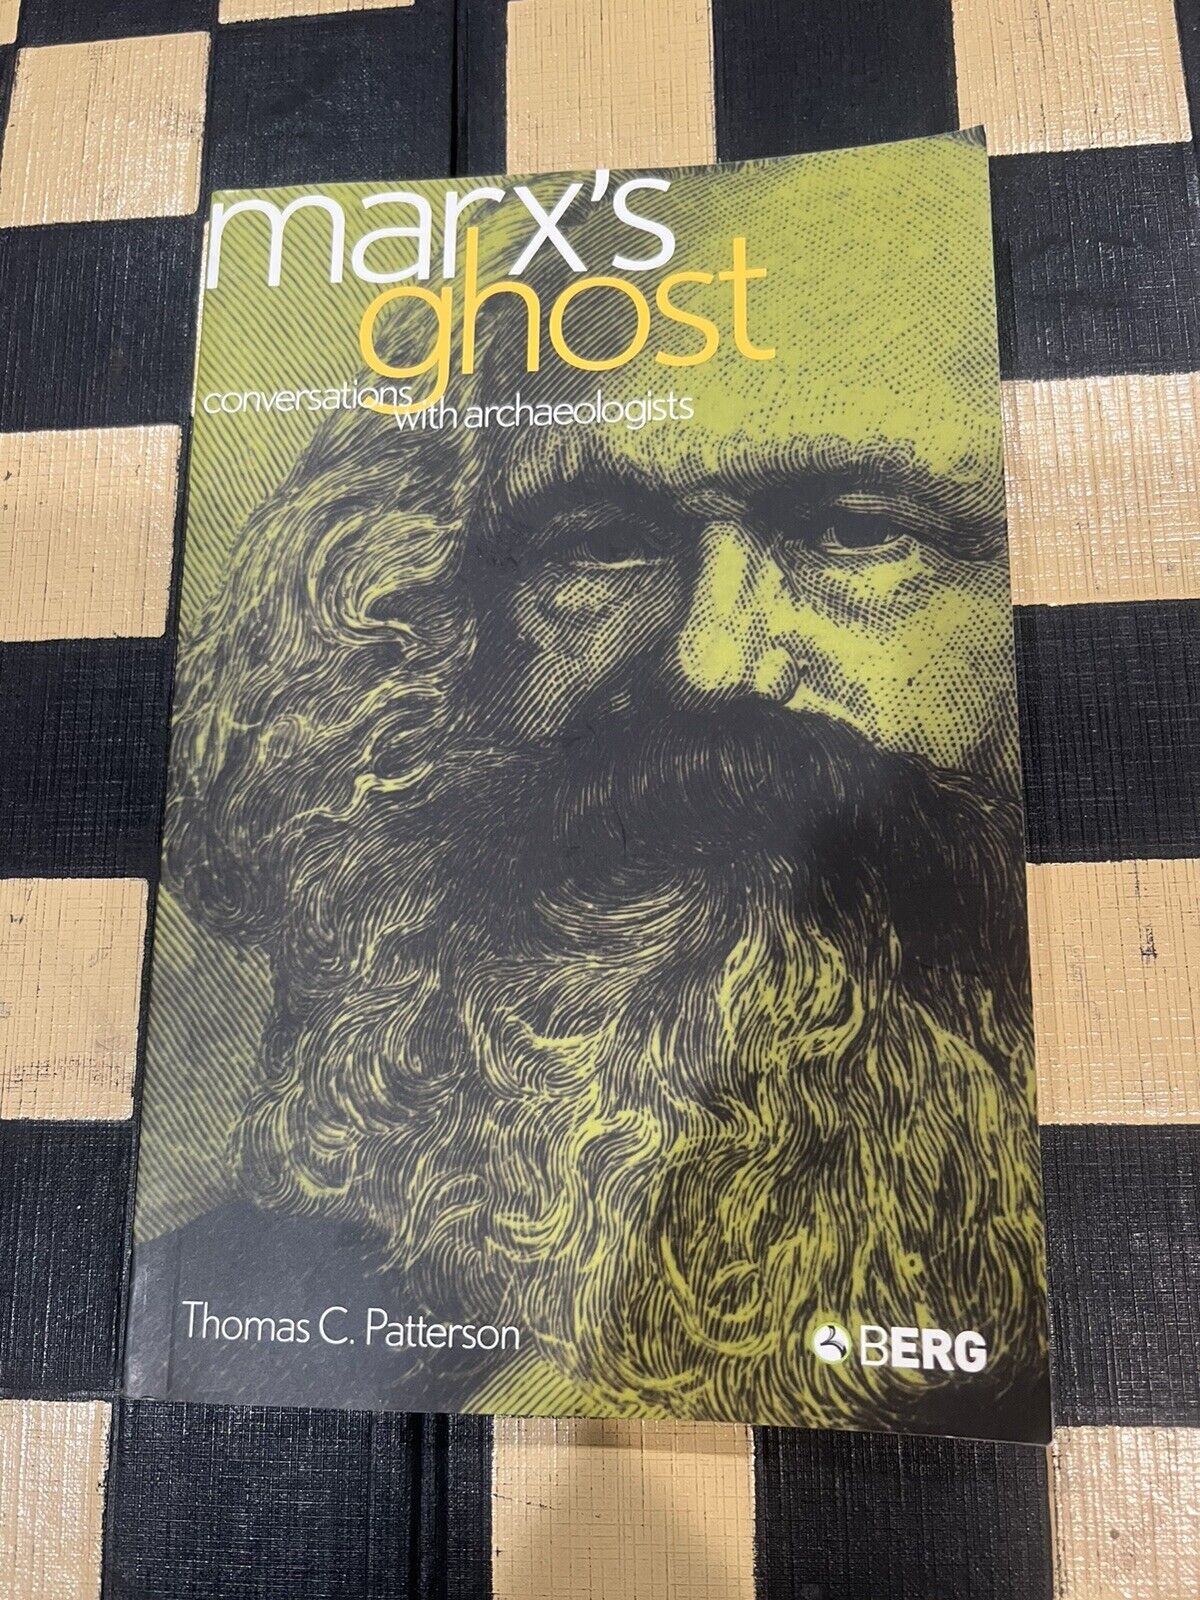 Marx\'s Ghost : Conversations with Archaeologists by Thomas C. Patterson...